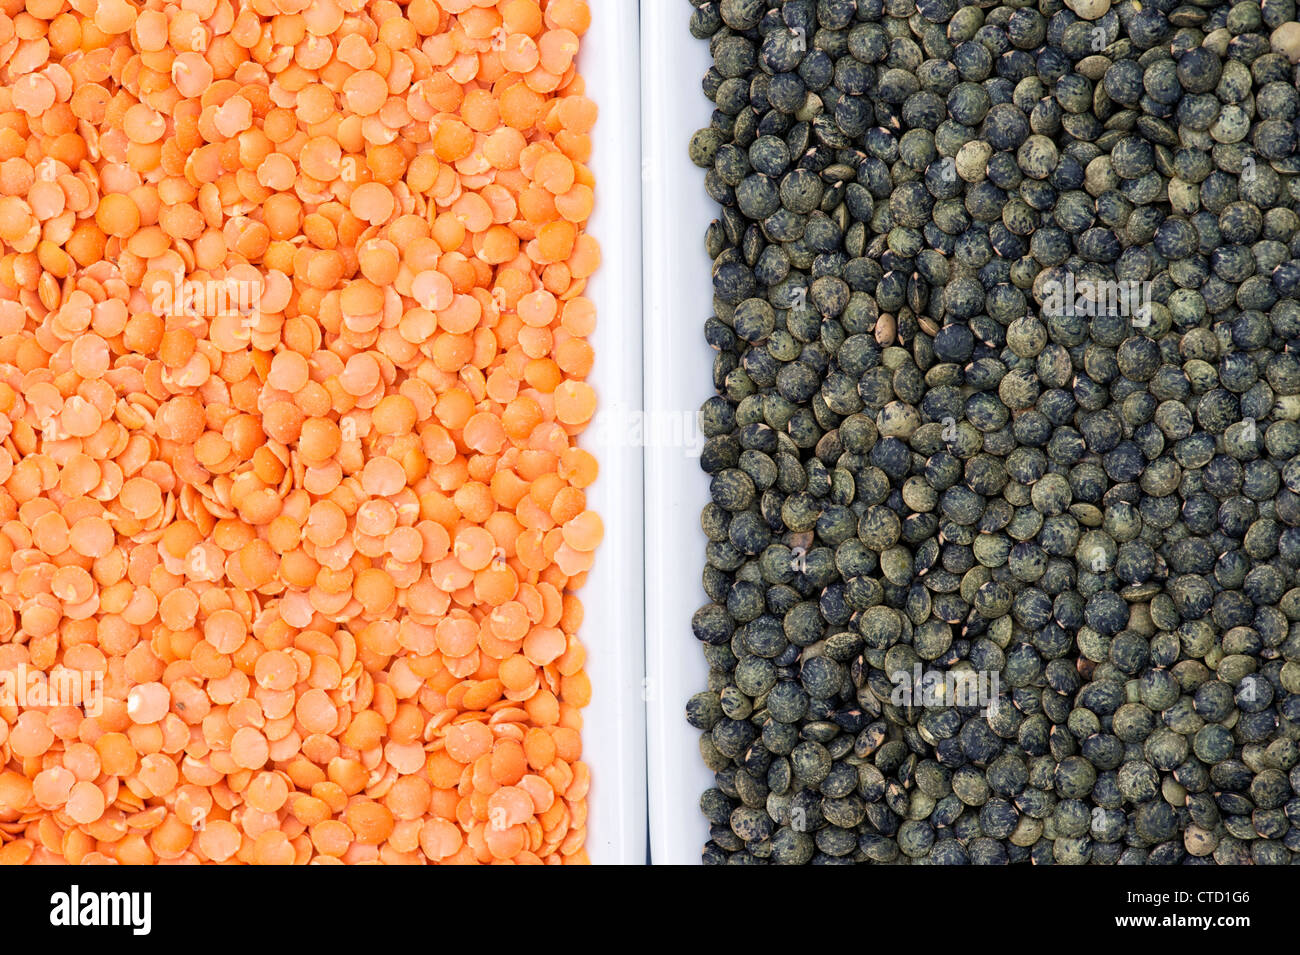 Red and Green Lentils Stock Photo